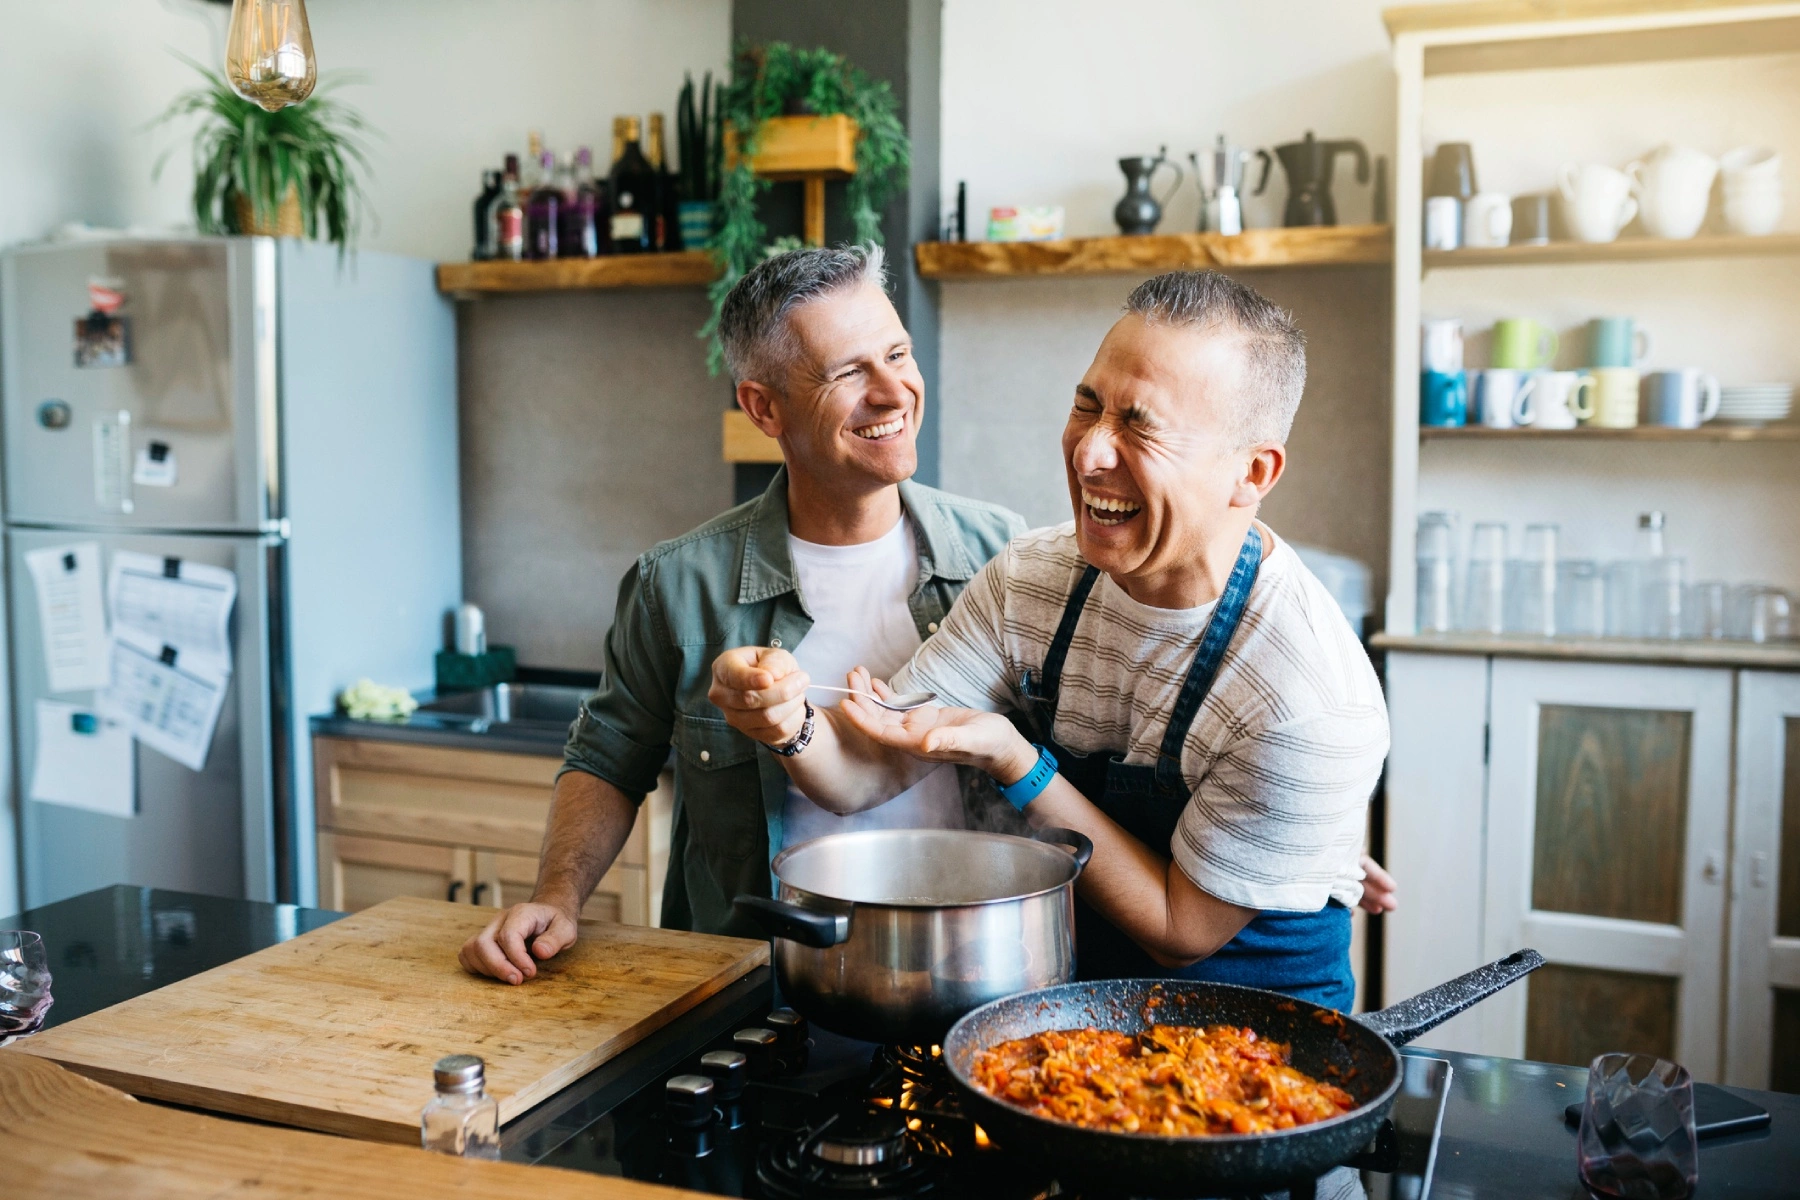 a male same-sex couple chatting and laughing together in a kitchen